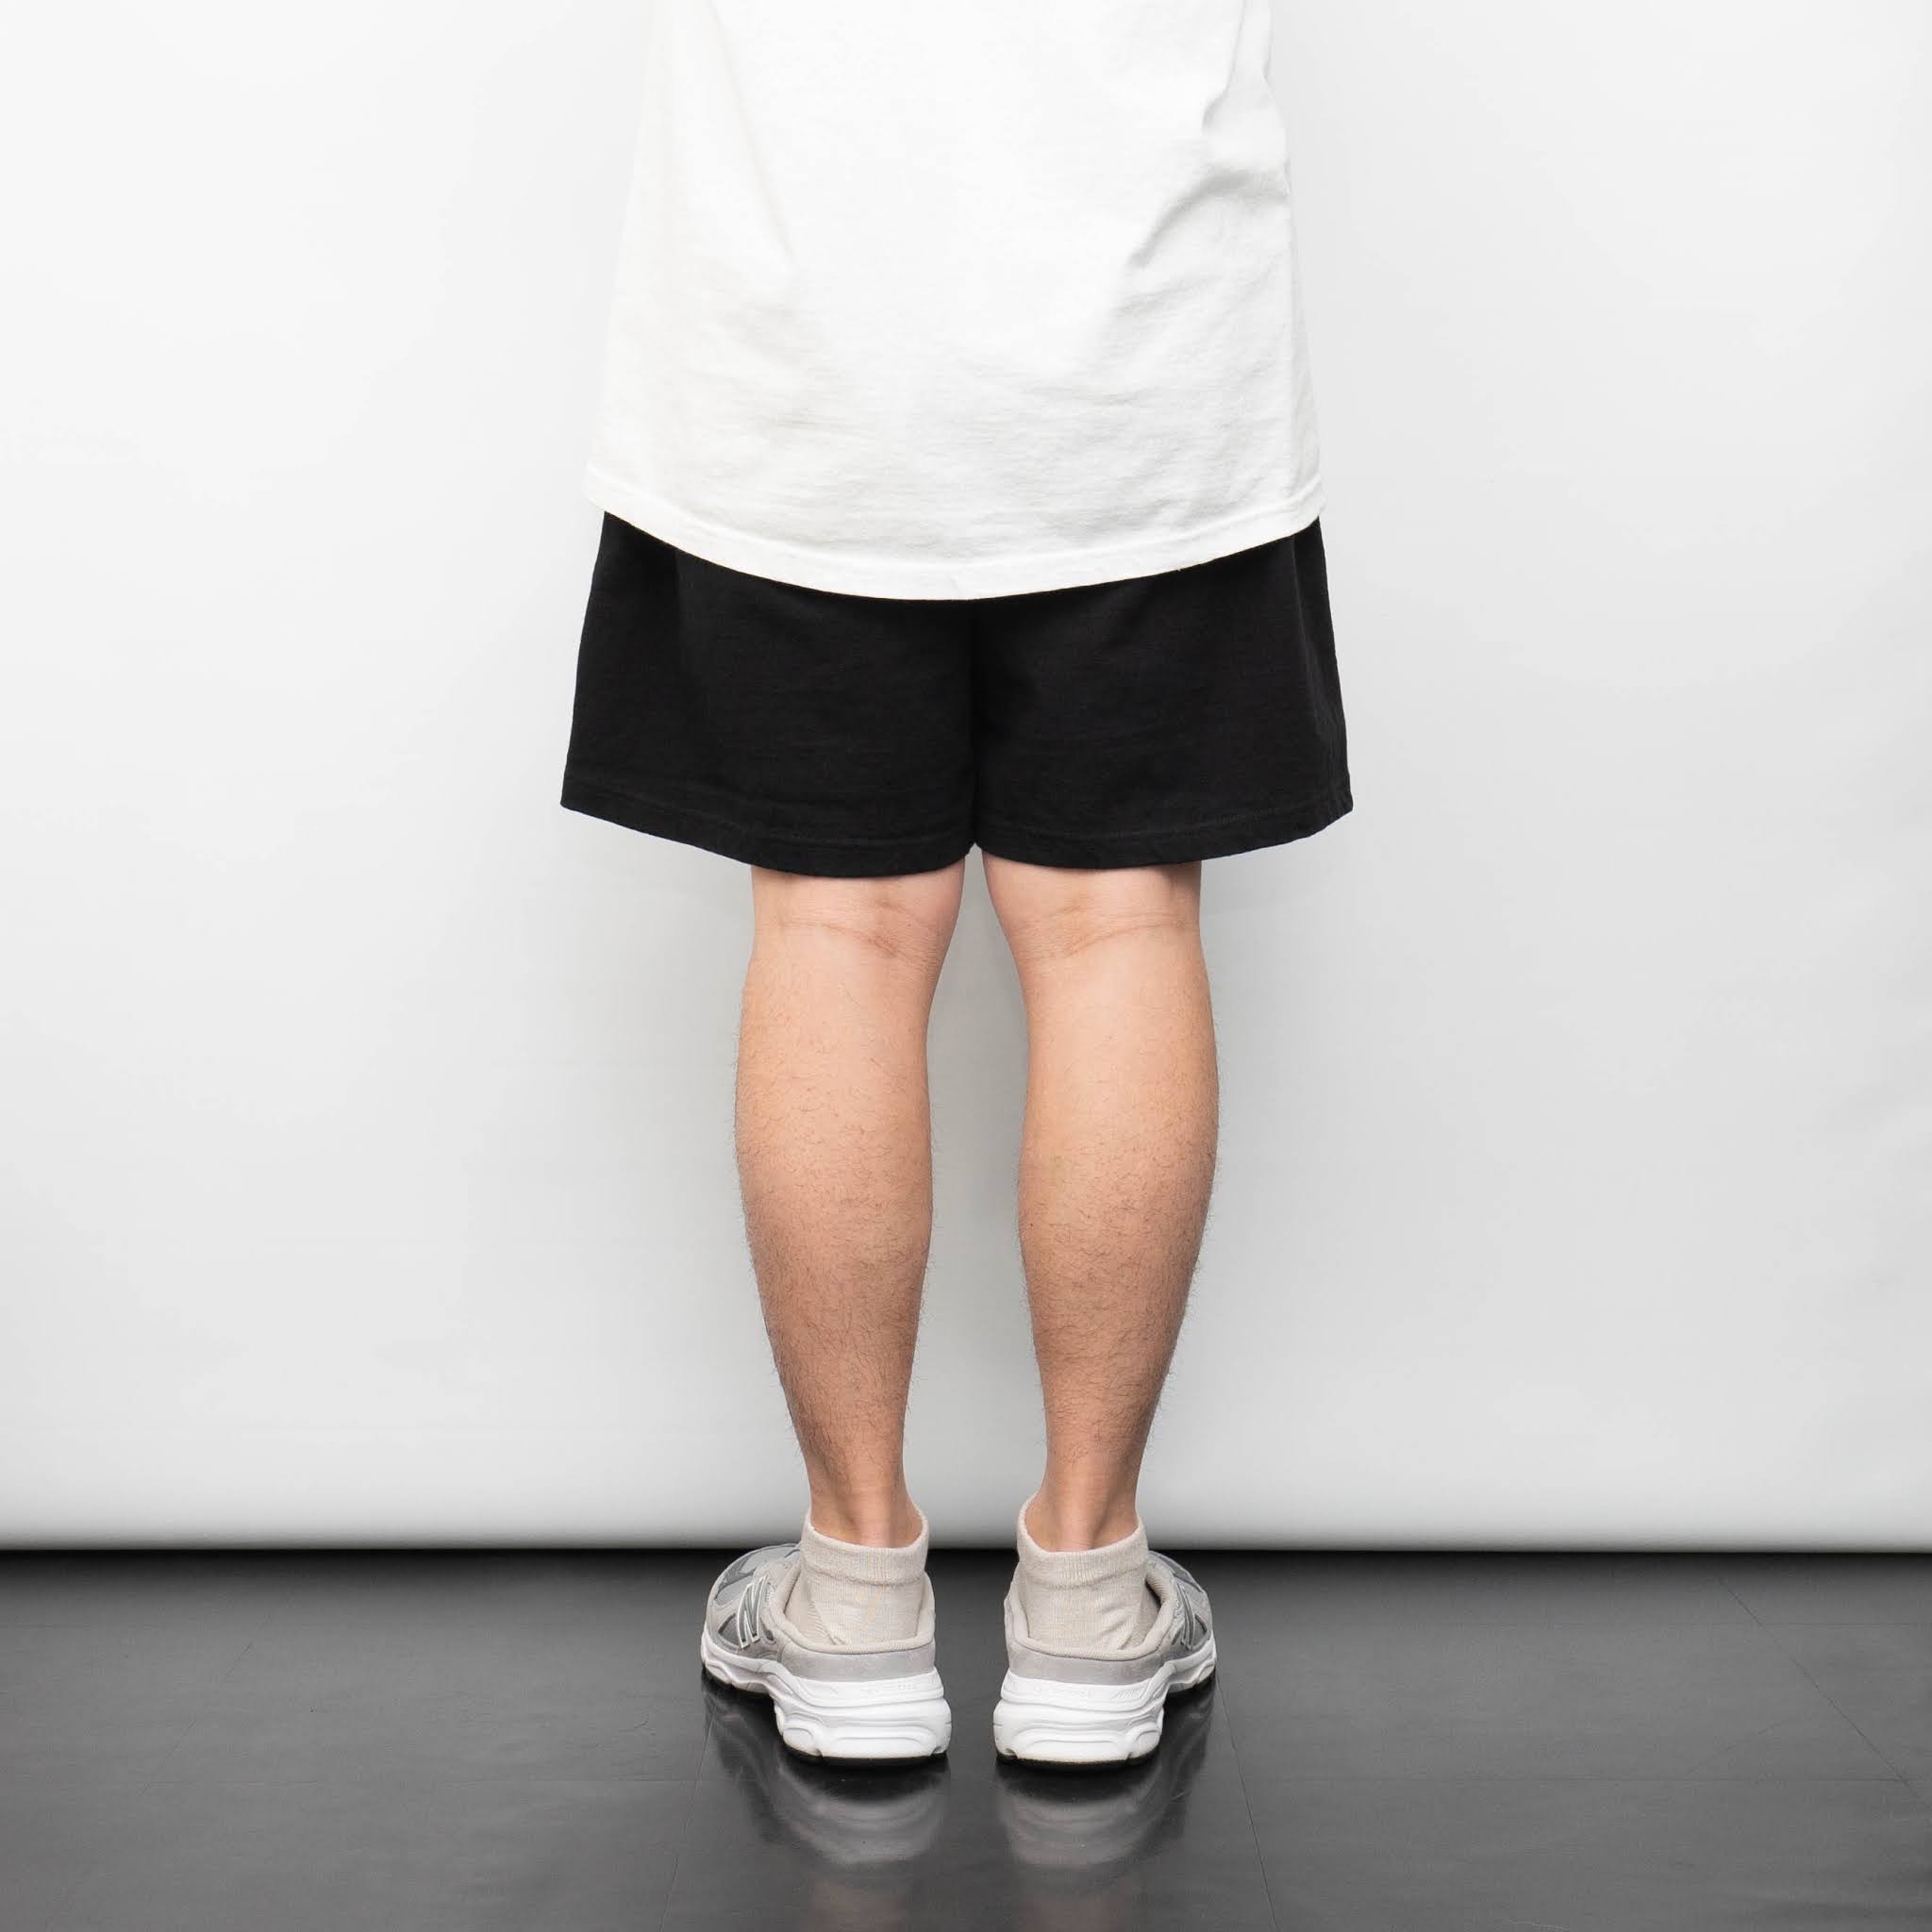 CUP AND CONE COTTON SHORT PANT BLACK